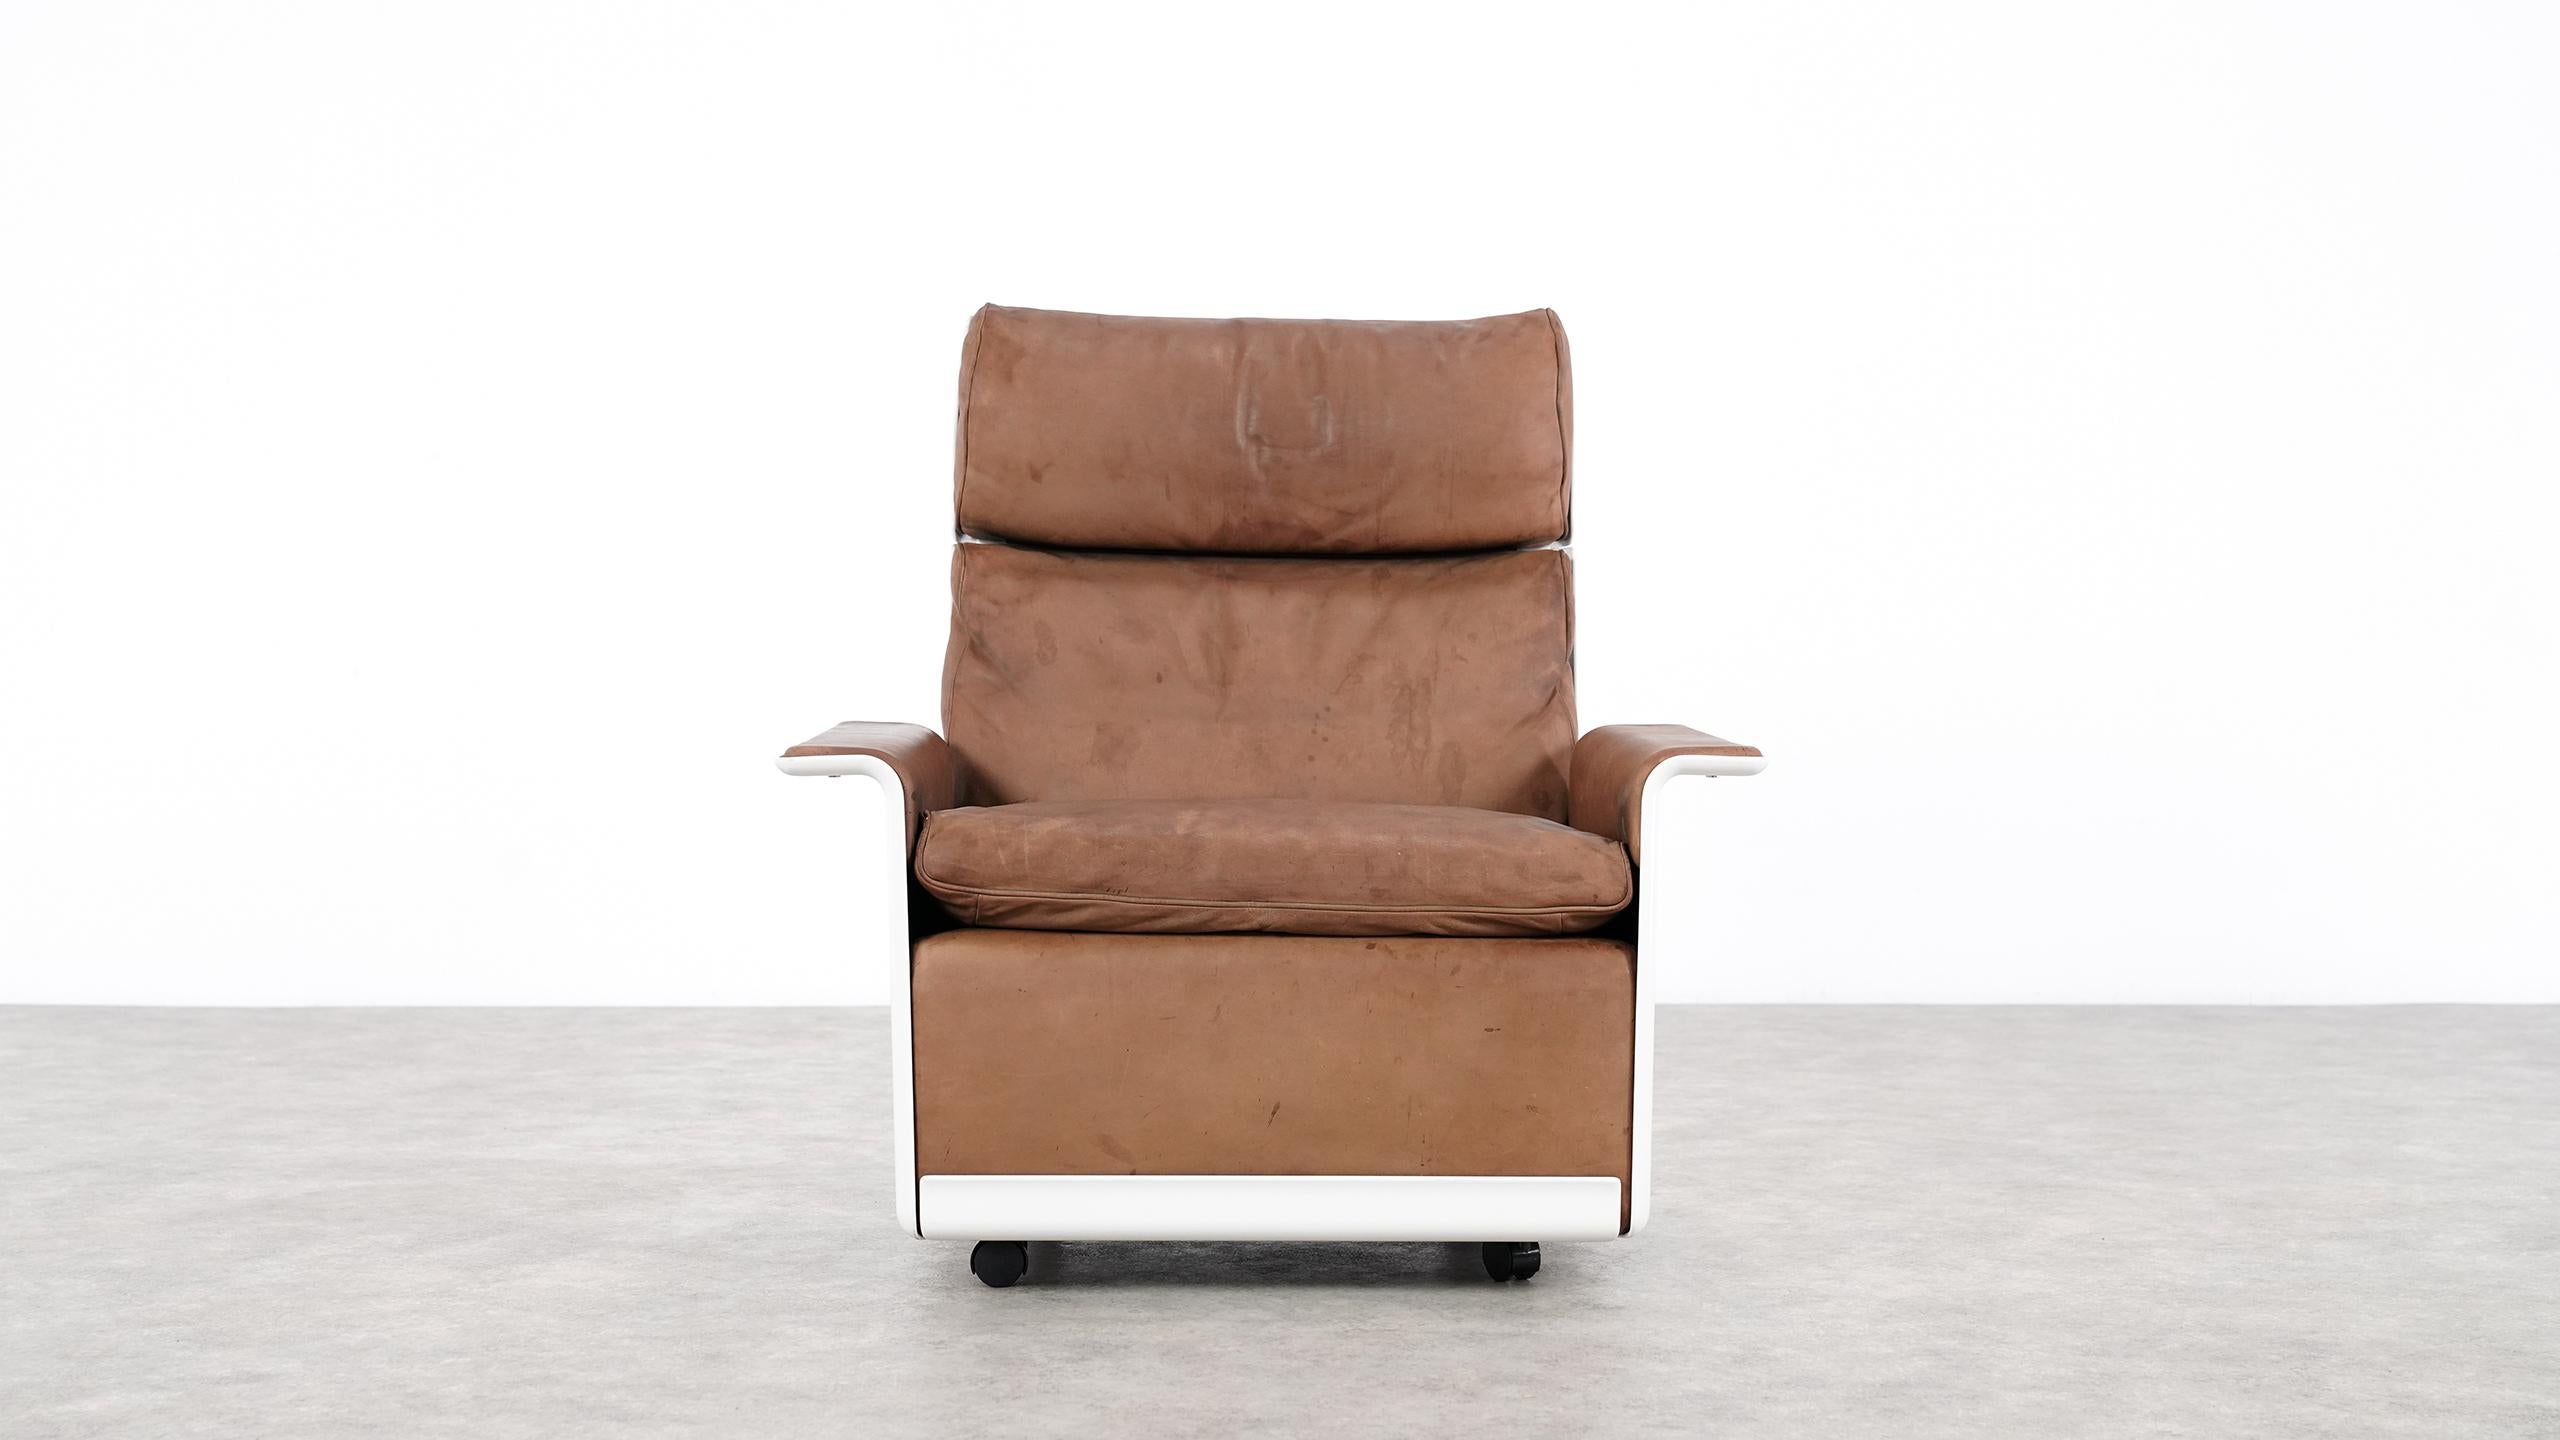 Dieter Rams Lounge Chair RZ 62 1962 by Vitsœ, Germany, Chocolate Leather 1